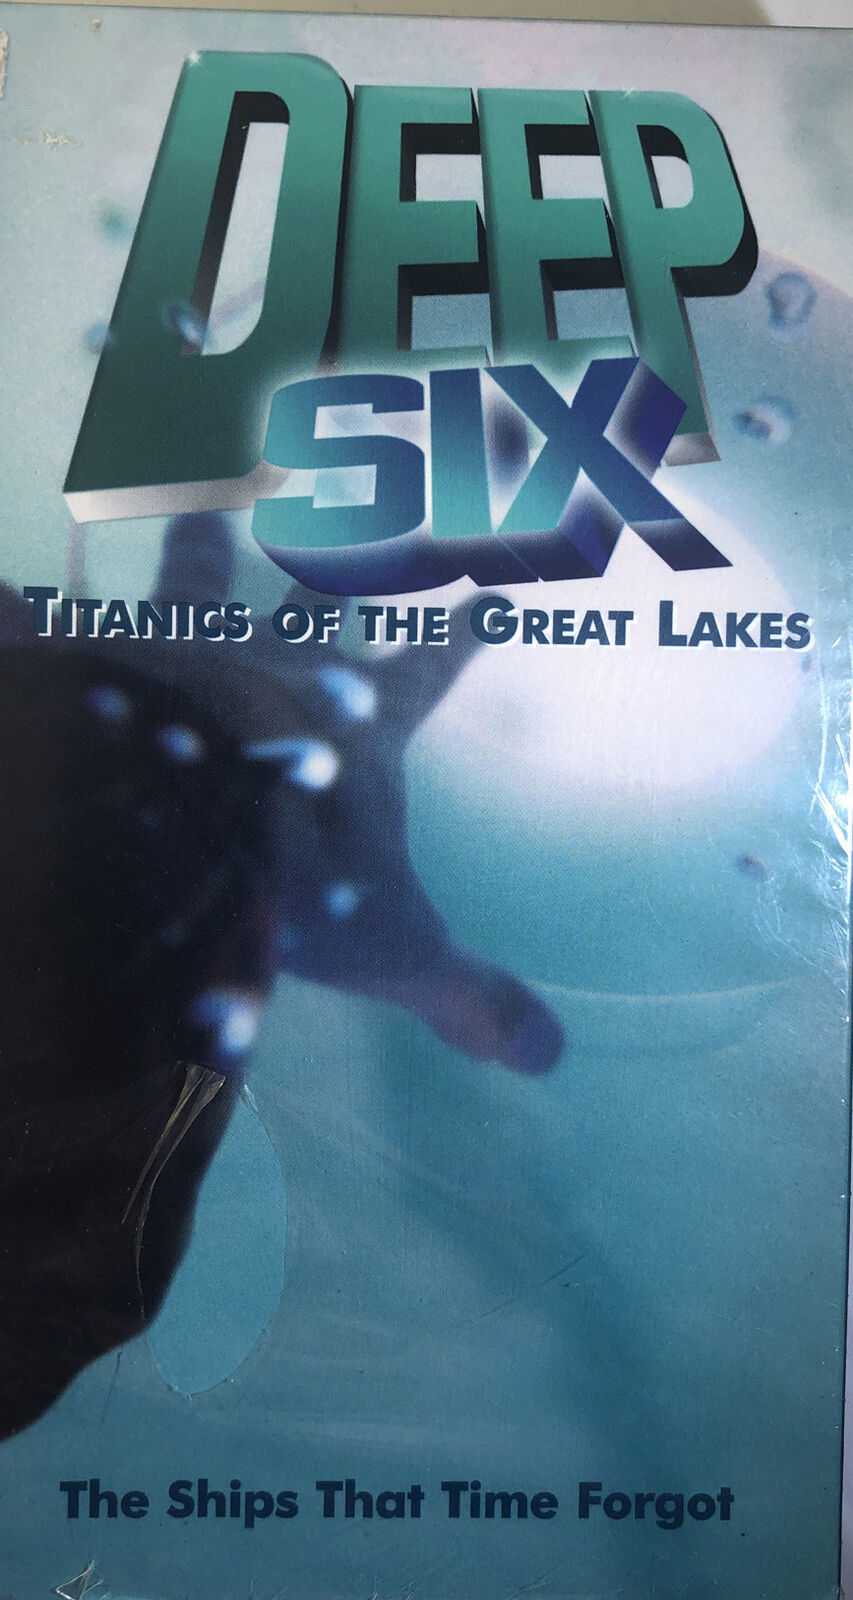 Primary image for Deep Six: Titanics of the Great Lakes(VHS 1998) Shipwreck Documentary Fitzgerald